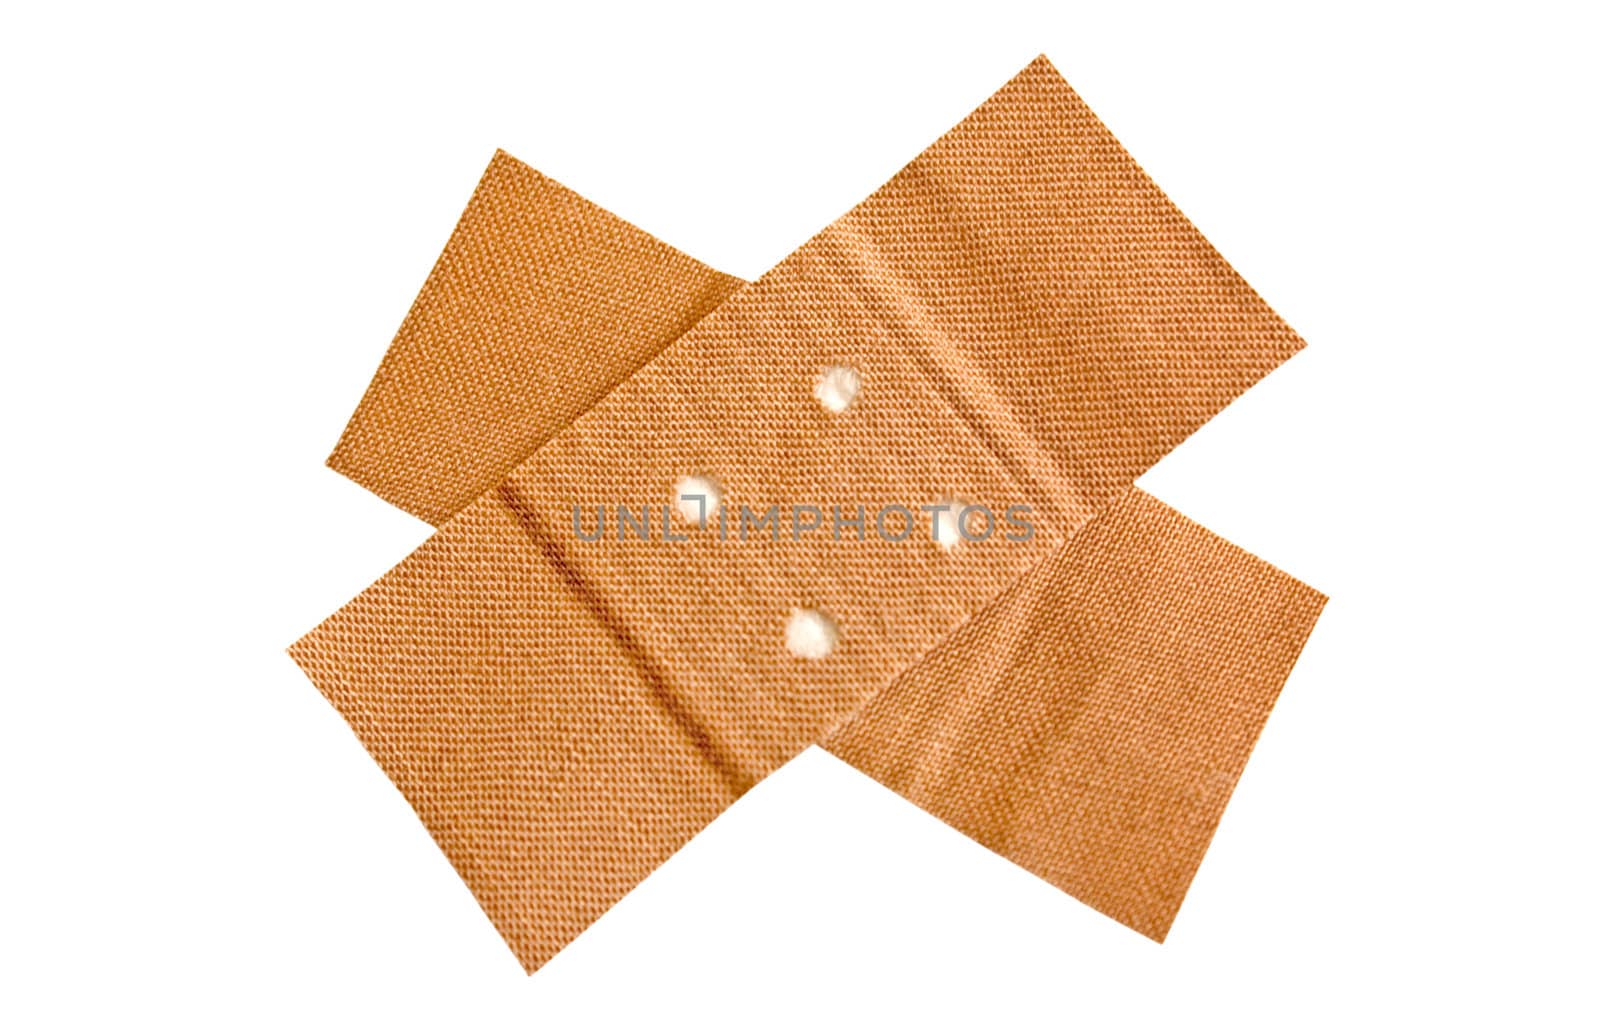 Cross shaped adhesive bandage isolated on a white background. File contains clipping path.